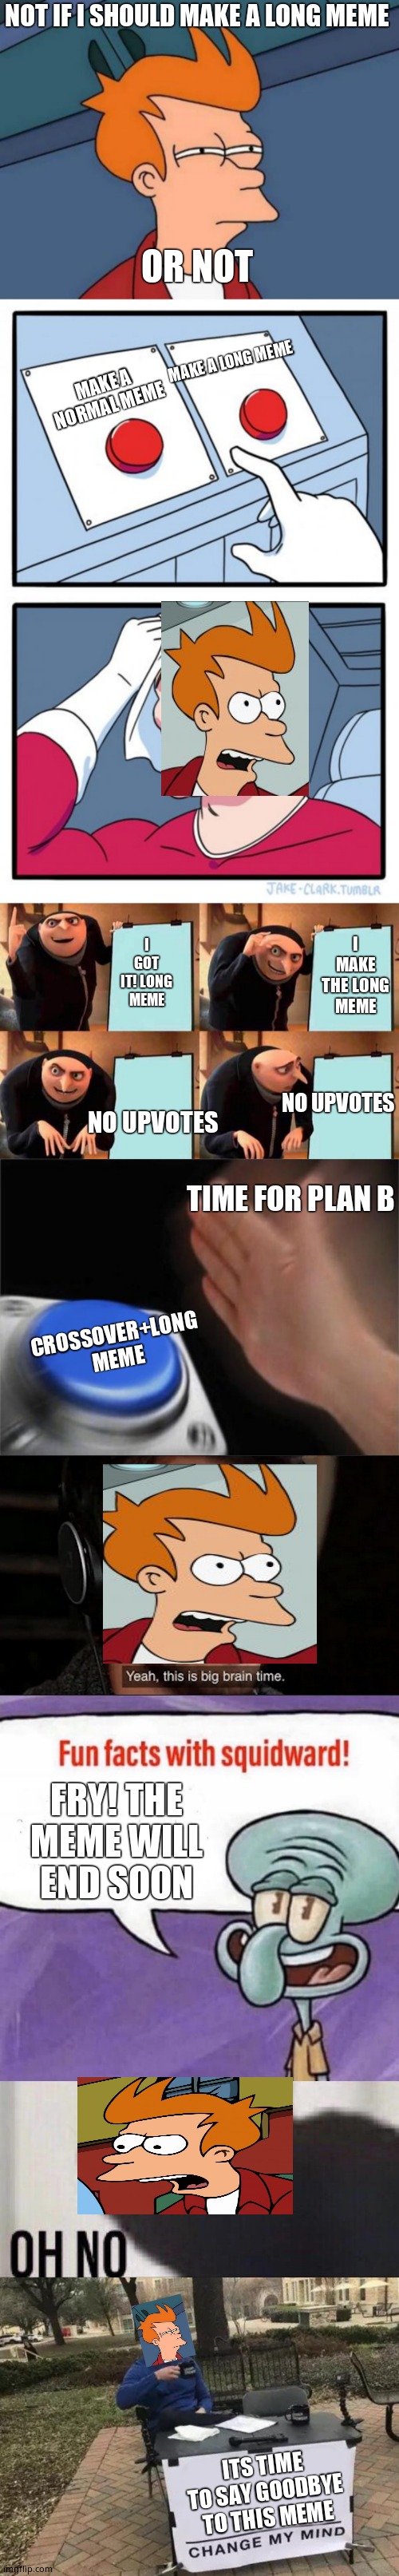 NOT IF I SHOULD MAKE A LONG MEME; OR NOT; MAKE A NORMAL MEME; MAKE A LONG MEME; I GOT IT! LONG MEME; I MAKE THE LONG MEME; NO UPVOTES; NO UPVOTES; TIME FOR PLAN B; CROSSOVER+LONG MEME; FRY! THE MEME WILL END SOON; ITS TIME TO SAY GOODBYE TO THIS MEME | image tagged in memes,futurama fry | made w/ Imgflip meme maker